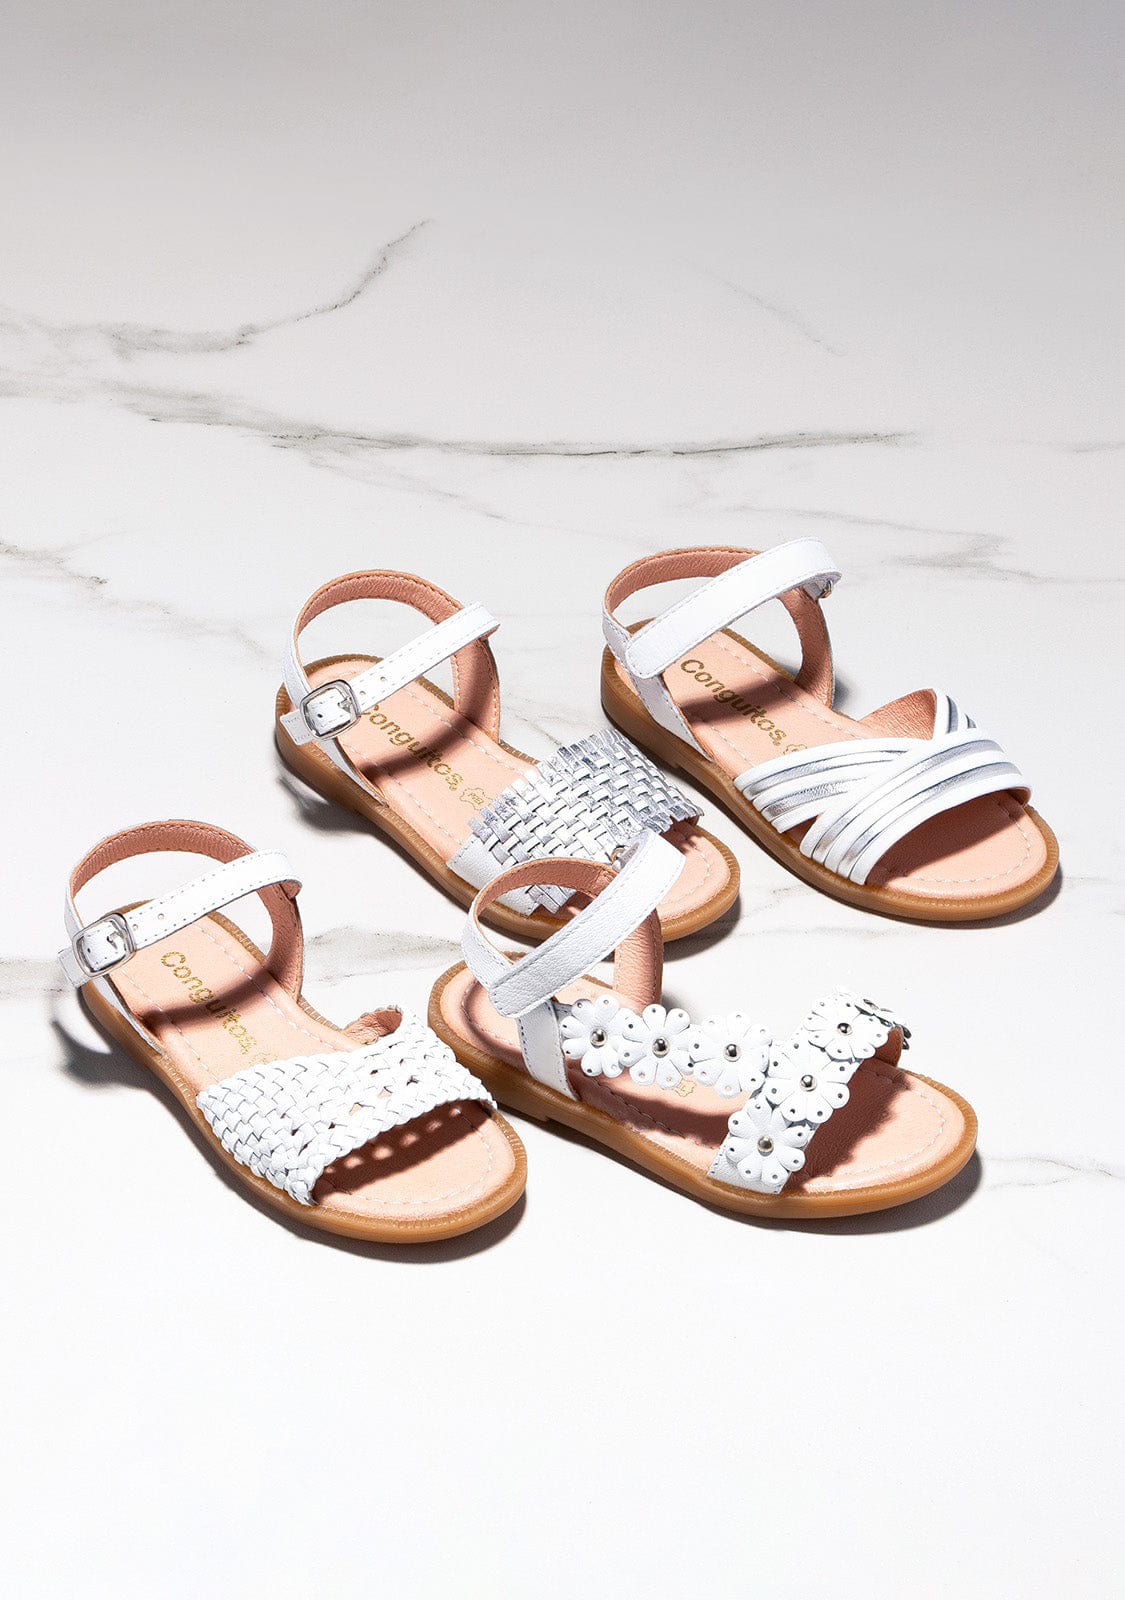 CONGUITOS Shoes Girl's White Daisy Leather Sandals